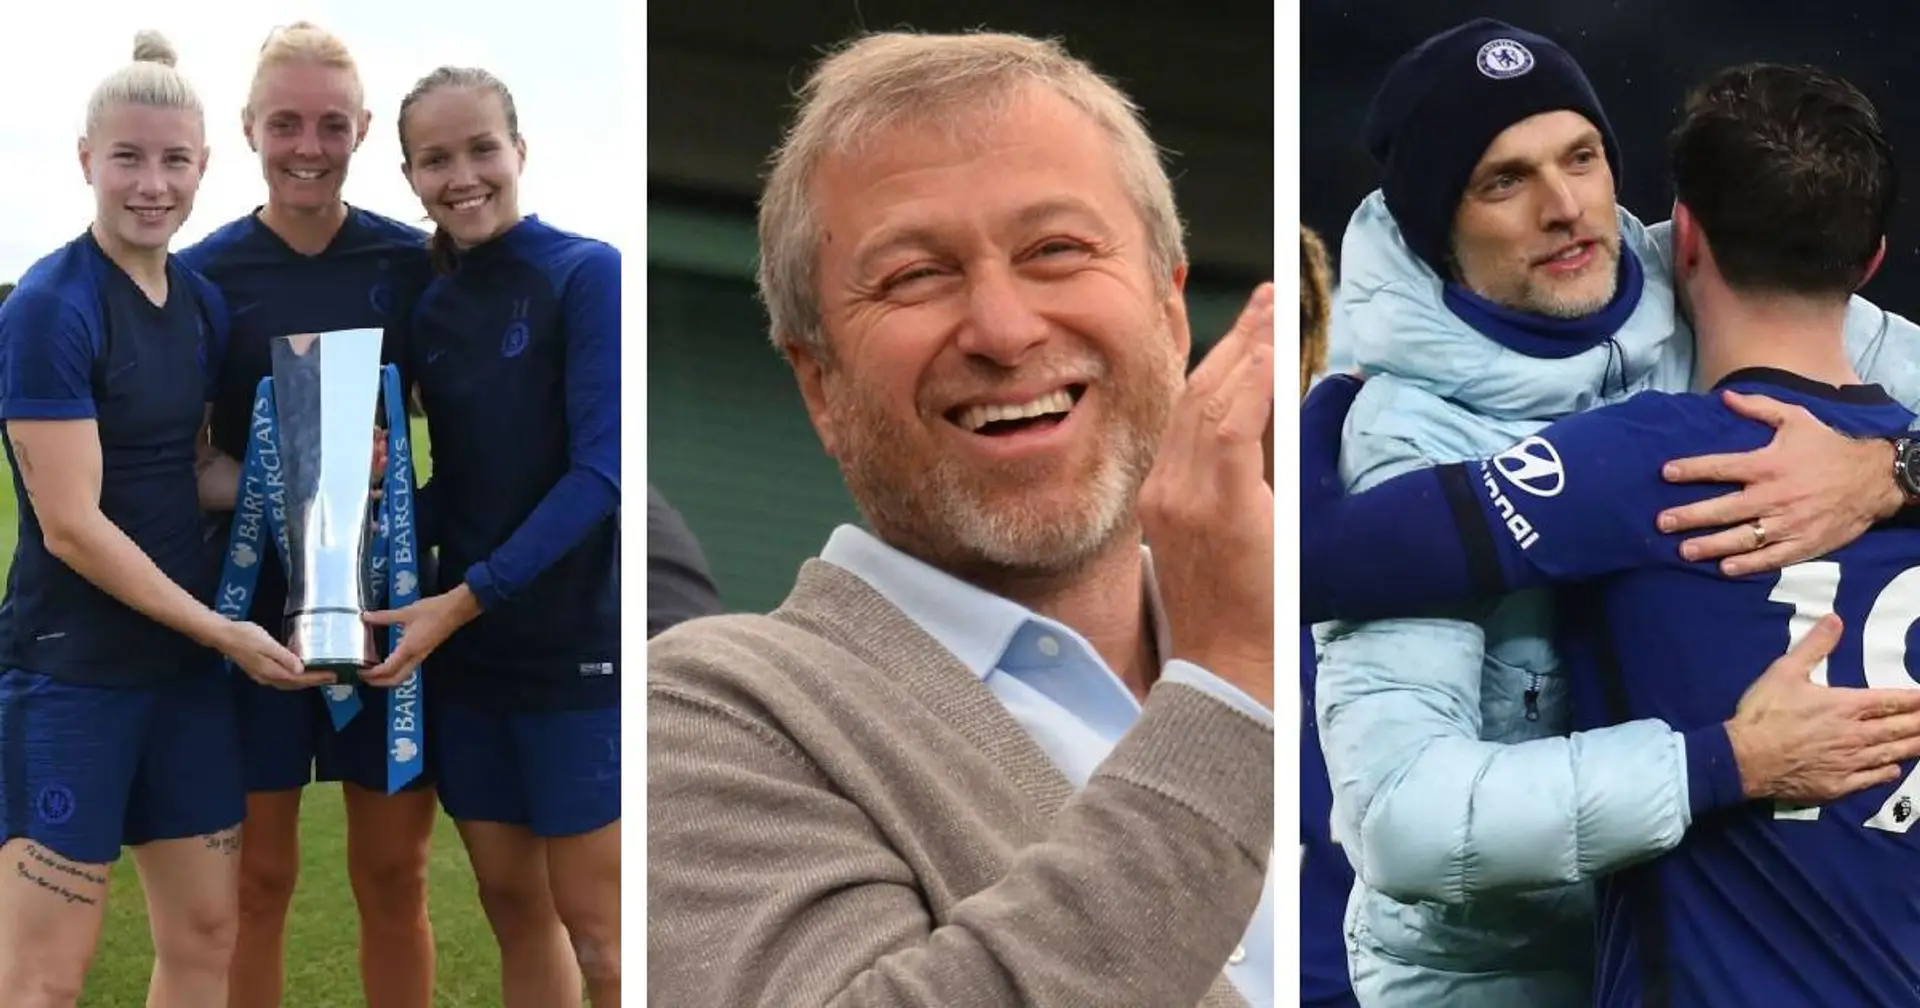 Abramovich details vision behind Chelsea's 'community' approach & more: Latest news round-up